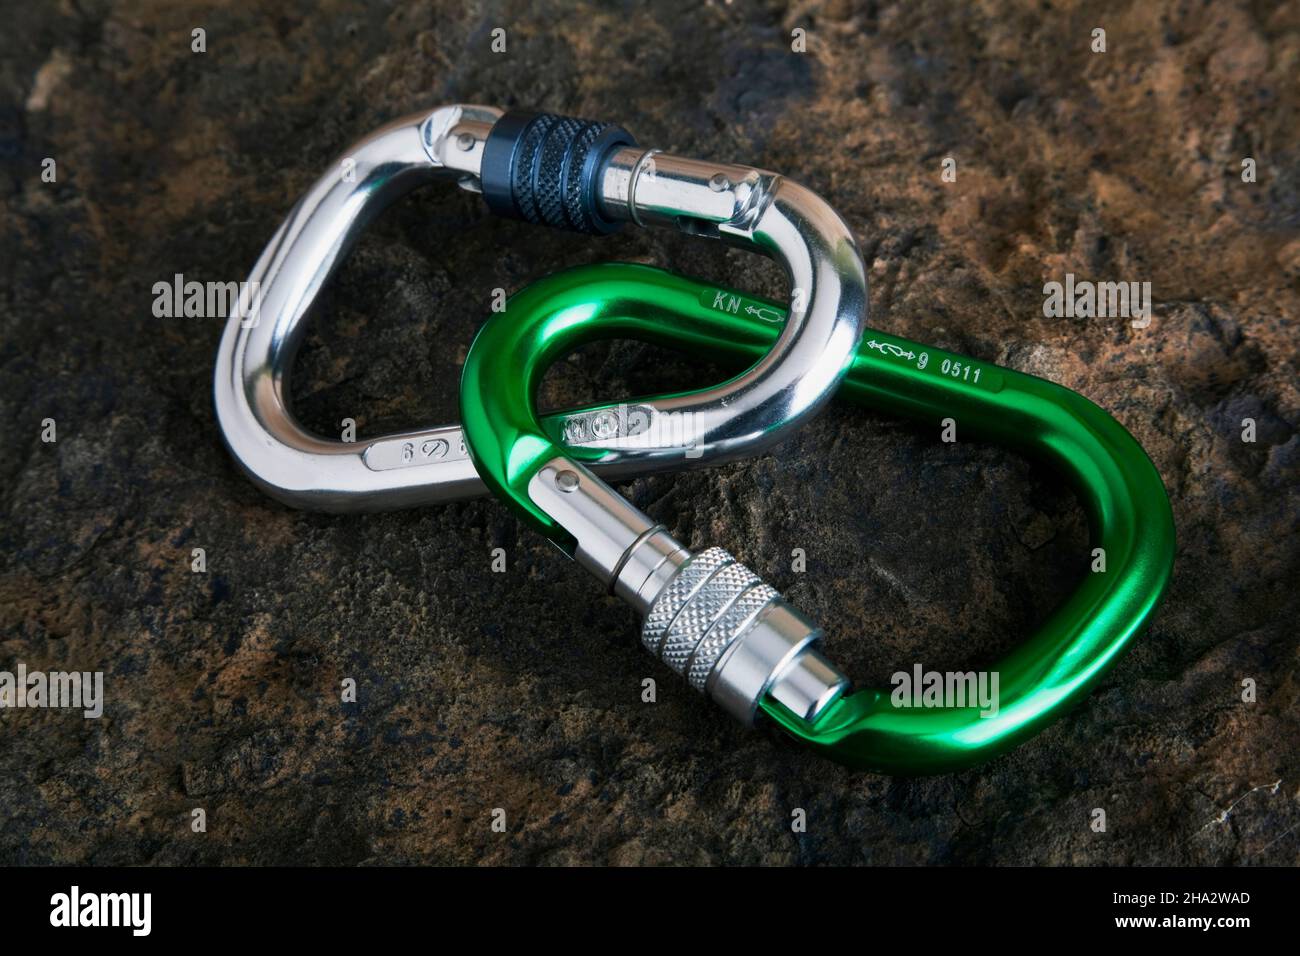 two carabiners on ston surface Stock Photo